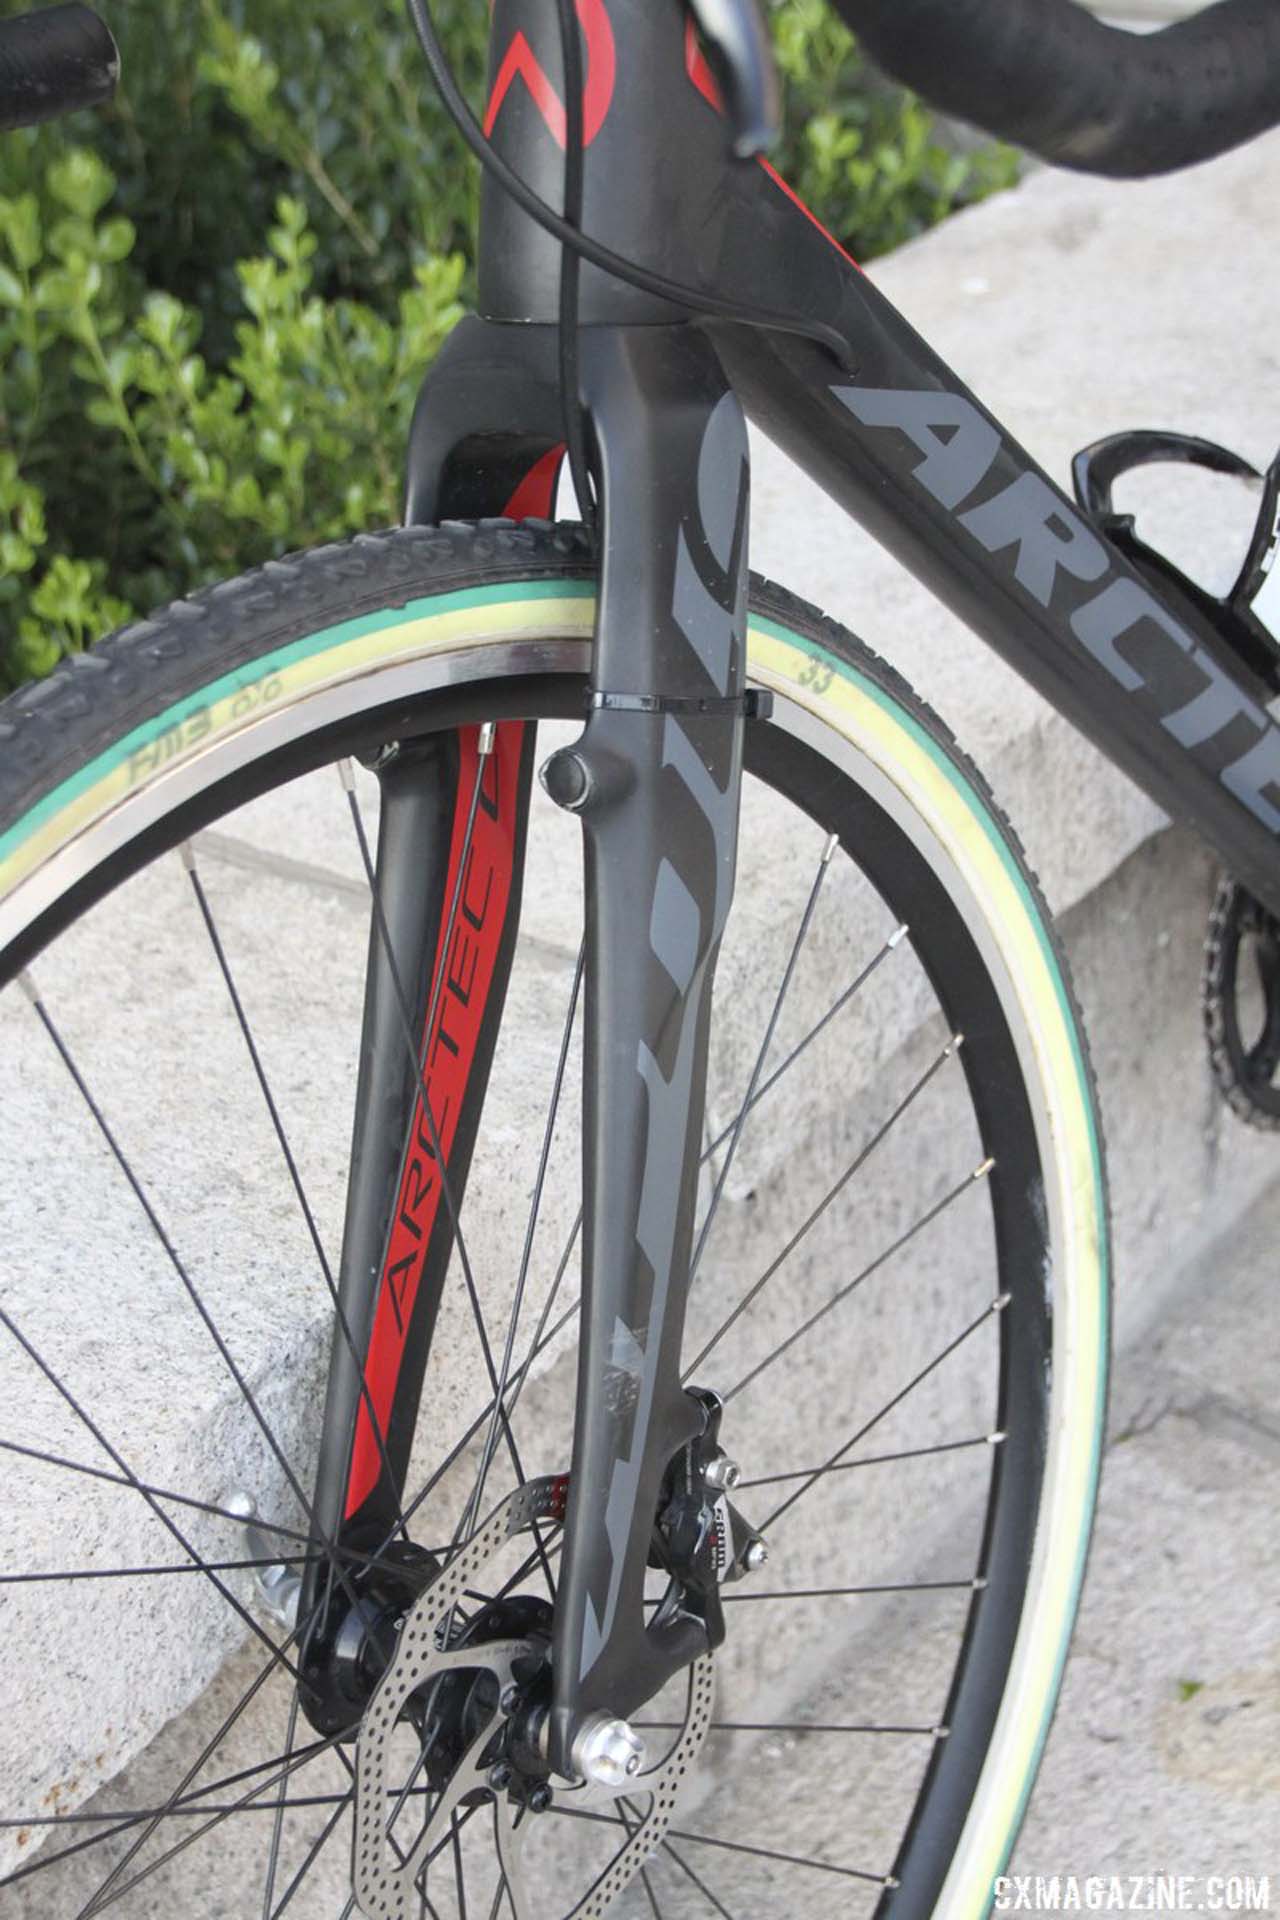 Jacobs’ Arctec CX fork, like the seatstays, will accommodate cantilever or disc brakes but the stock model is disc-only. © Cyclocross Magazine